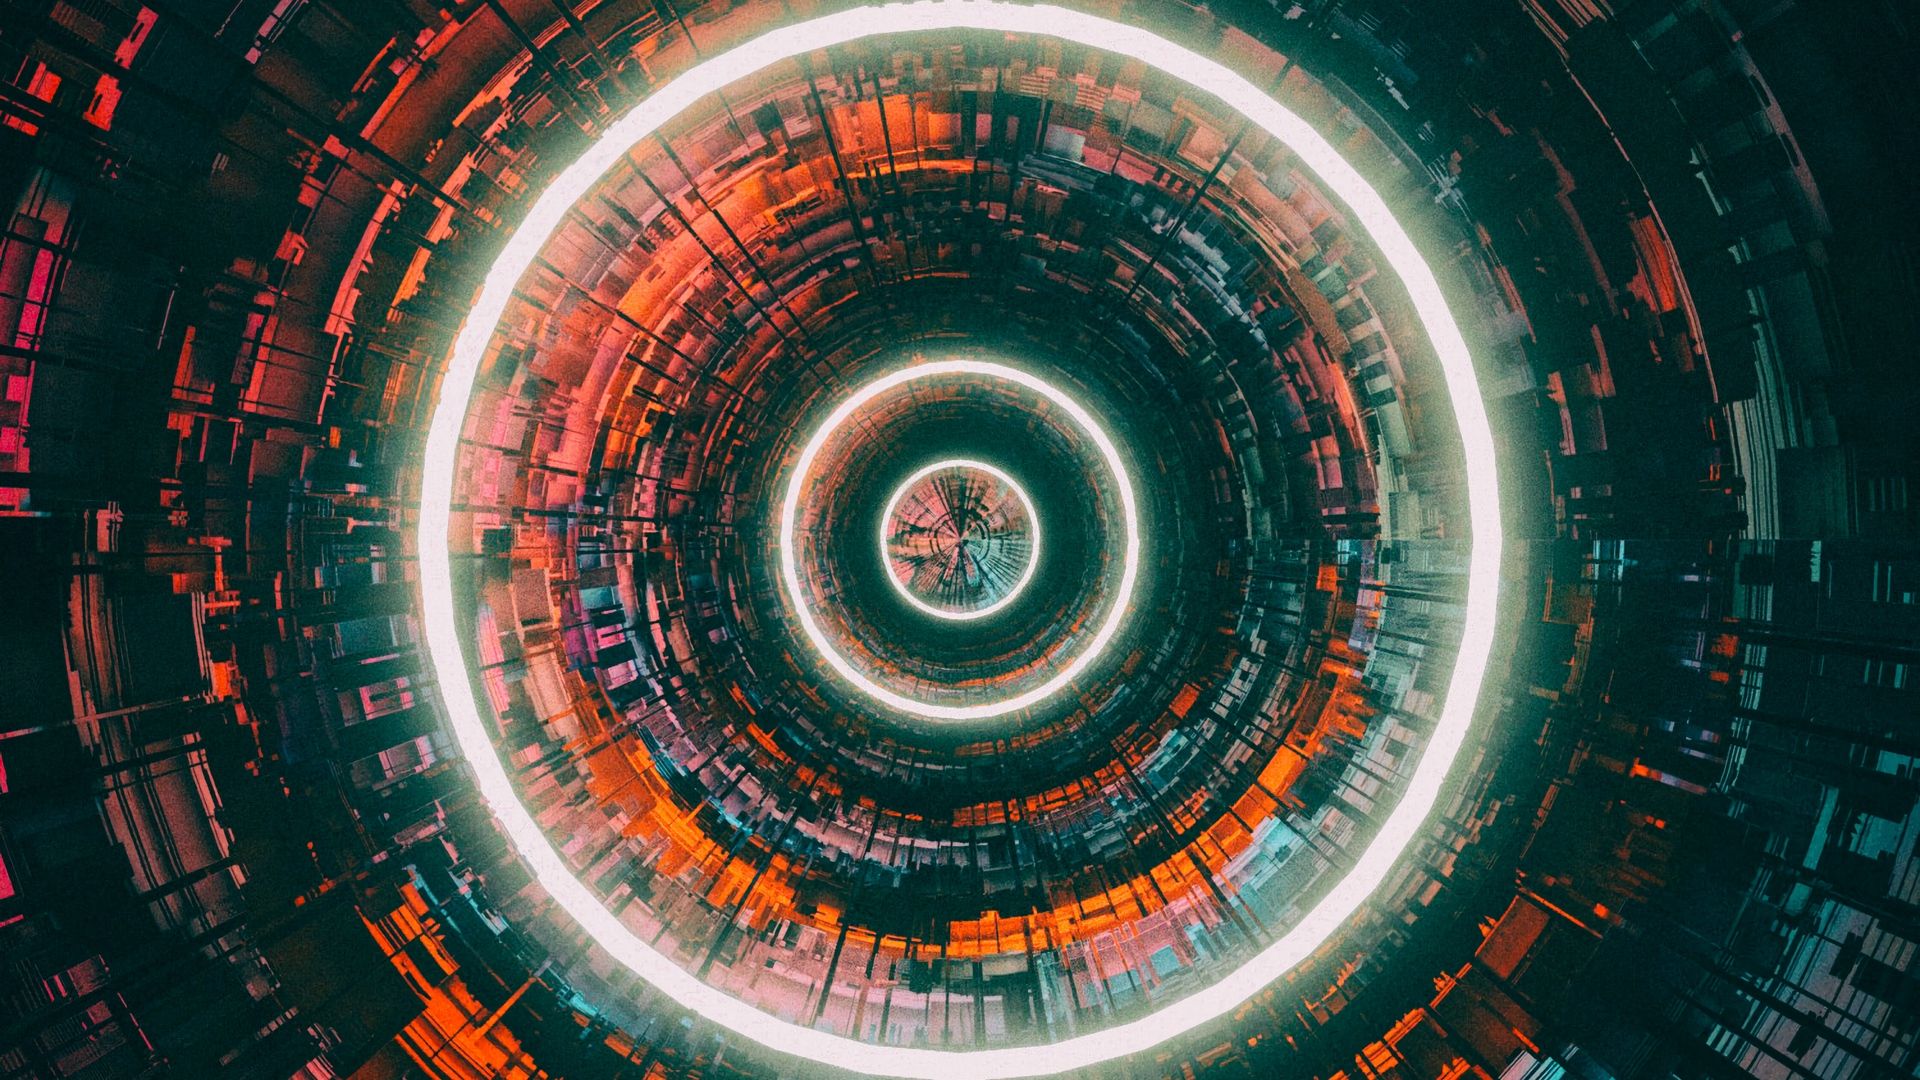 Download wallpapers 1920x1080 tunnel, circles, glow, neon, bright